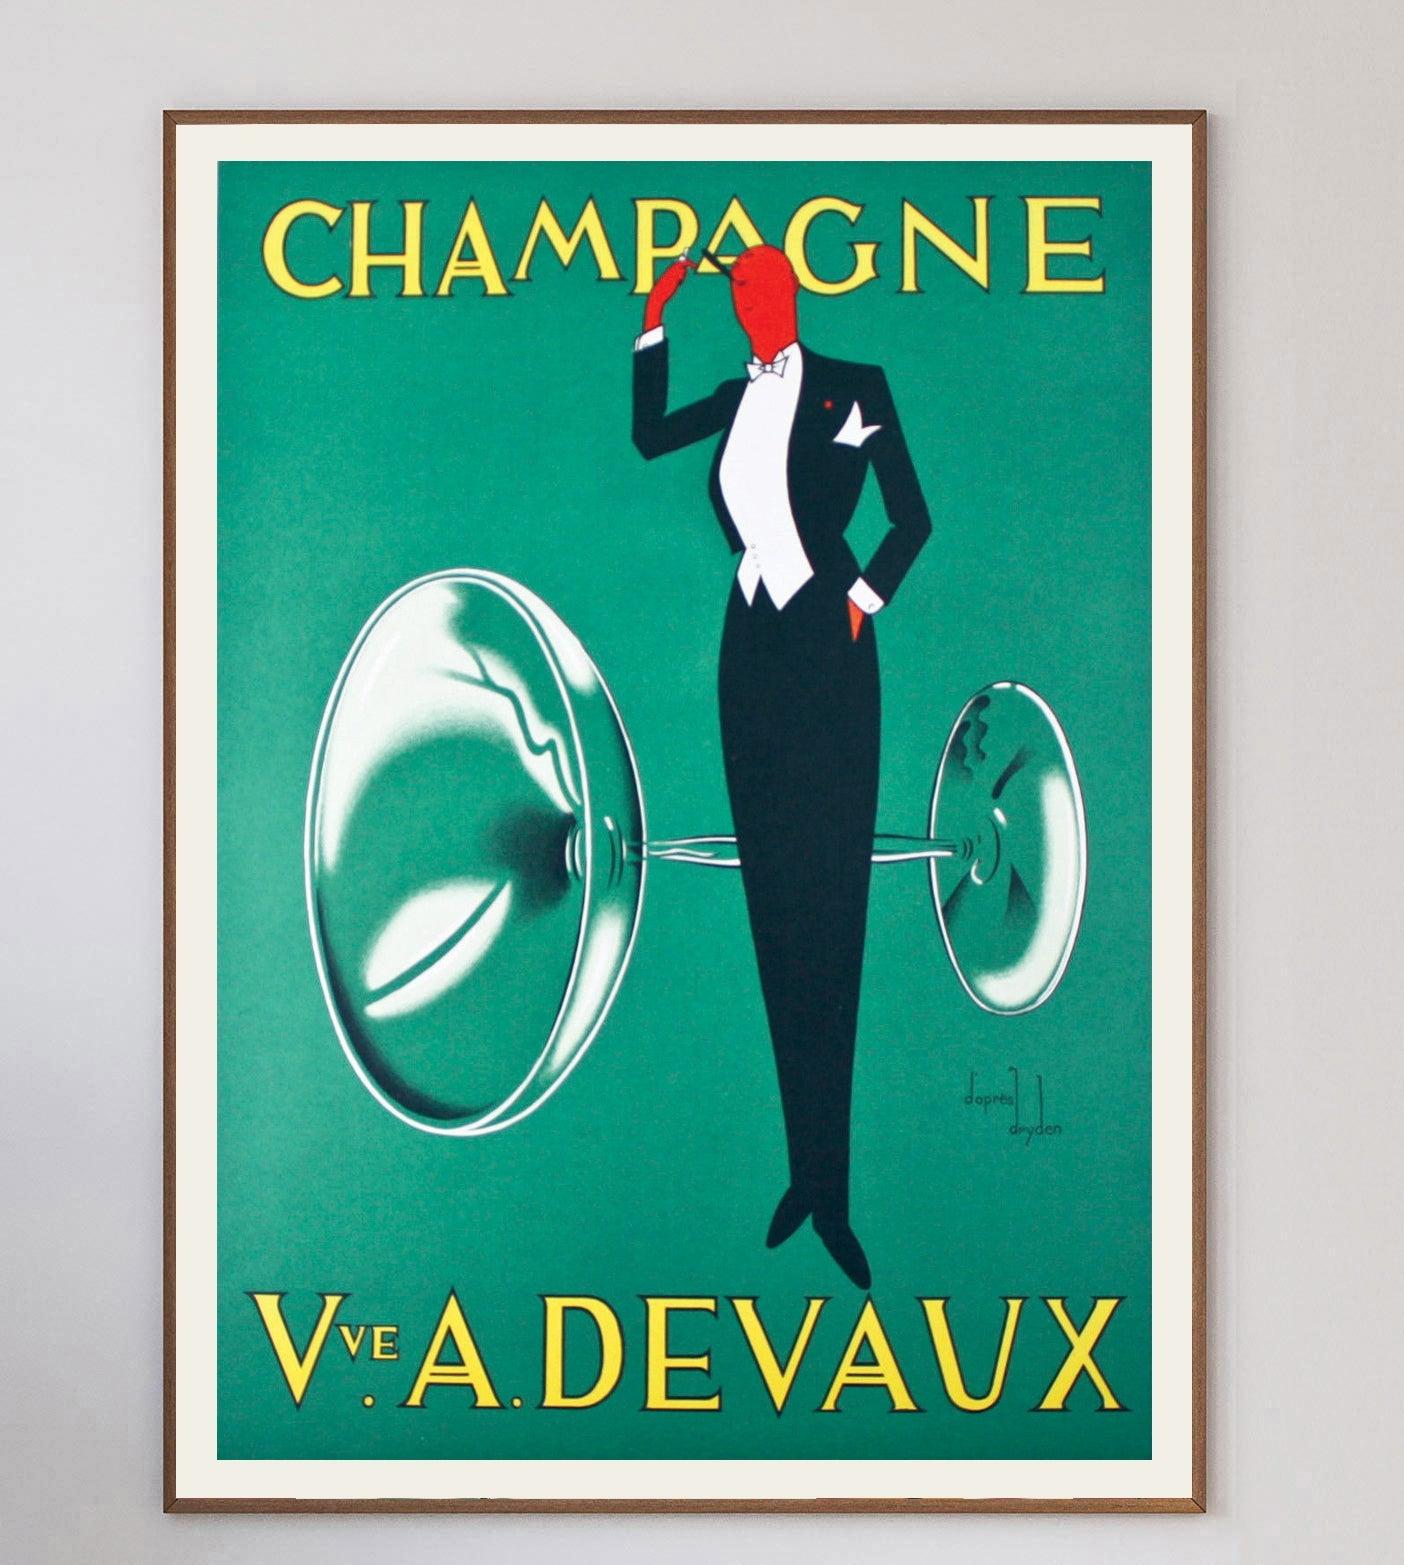 With stunning minimalist art-deco design from Austrian commercial artist and costume maker Ernst Deutsch Dryden, this iconic 1935 poster for Champagne Devaux is a piece of art as well as a piece of advertising history.

In mint condition and